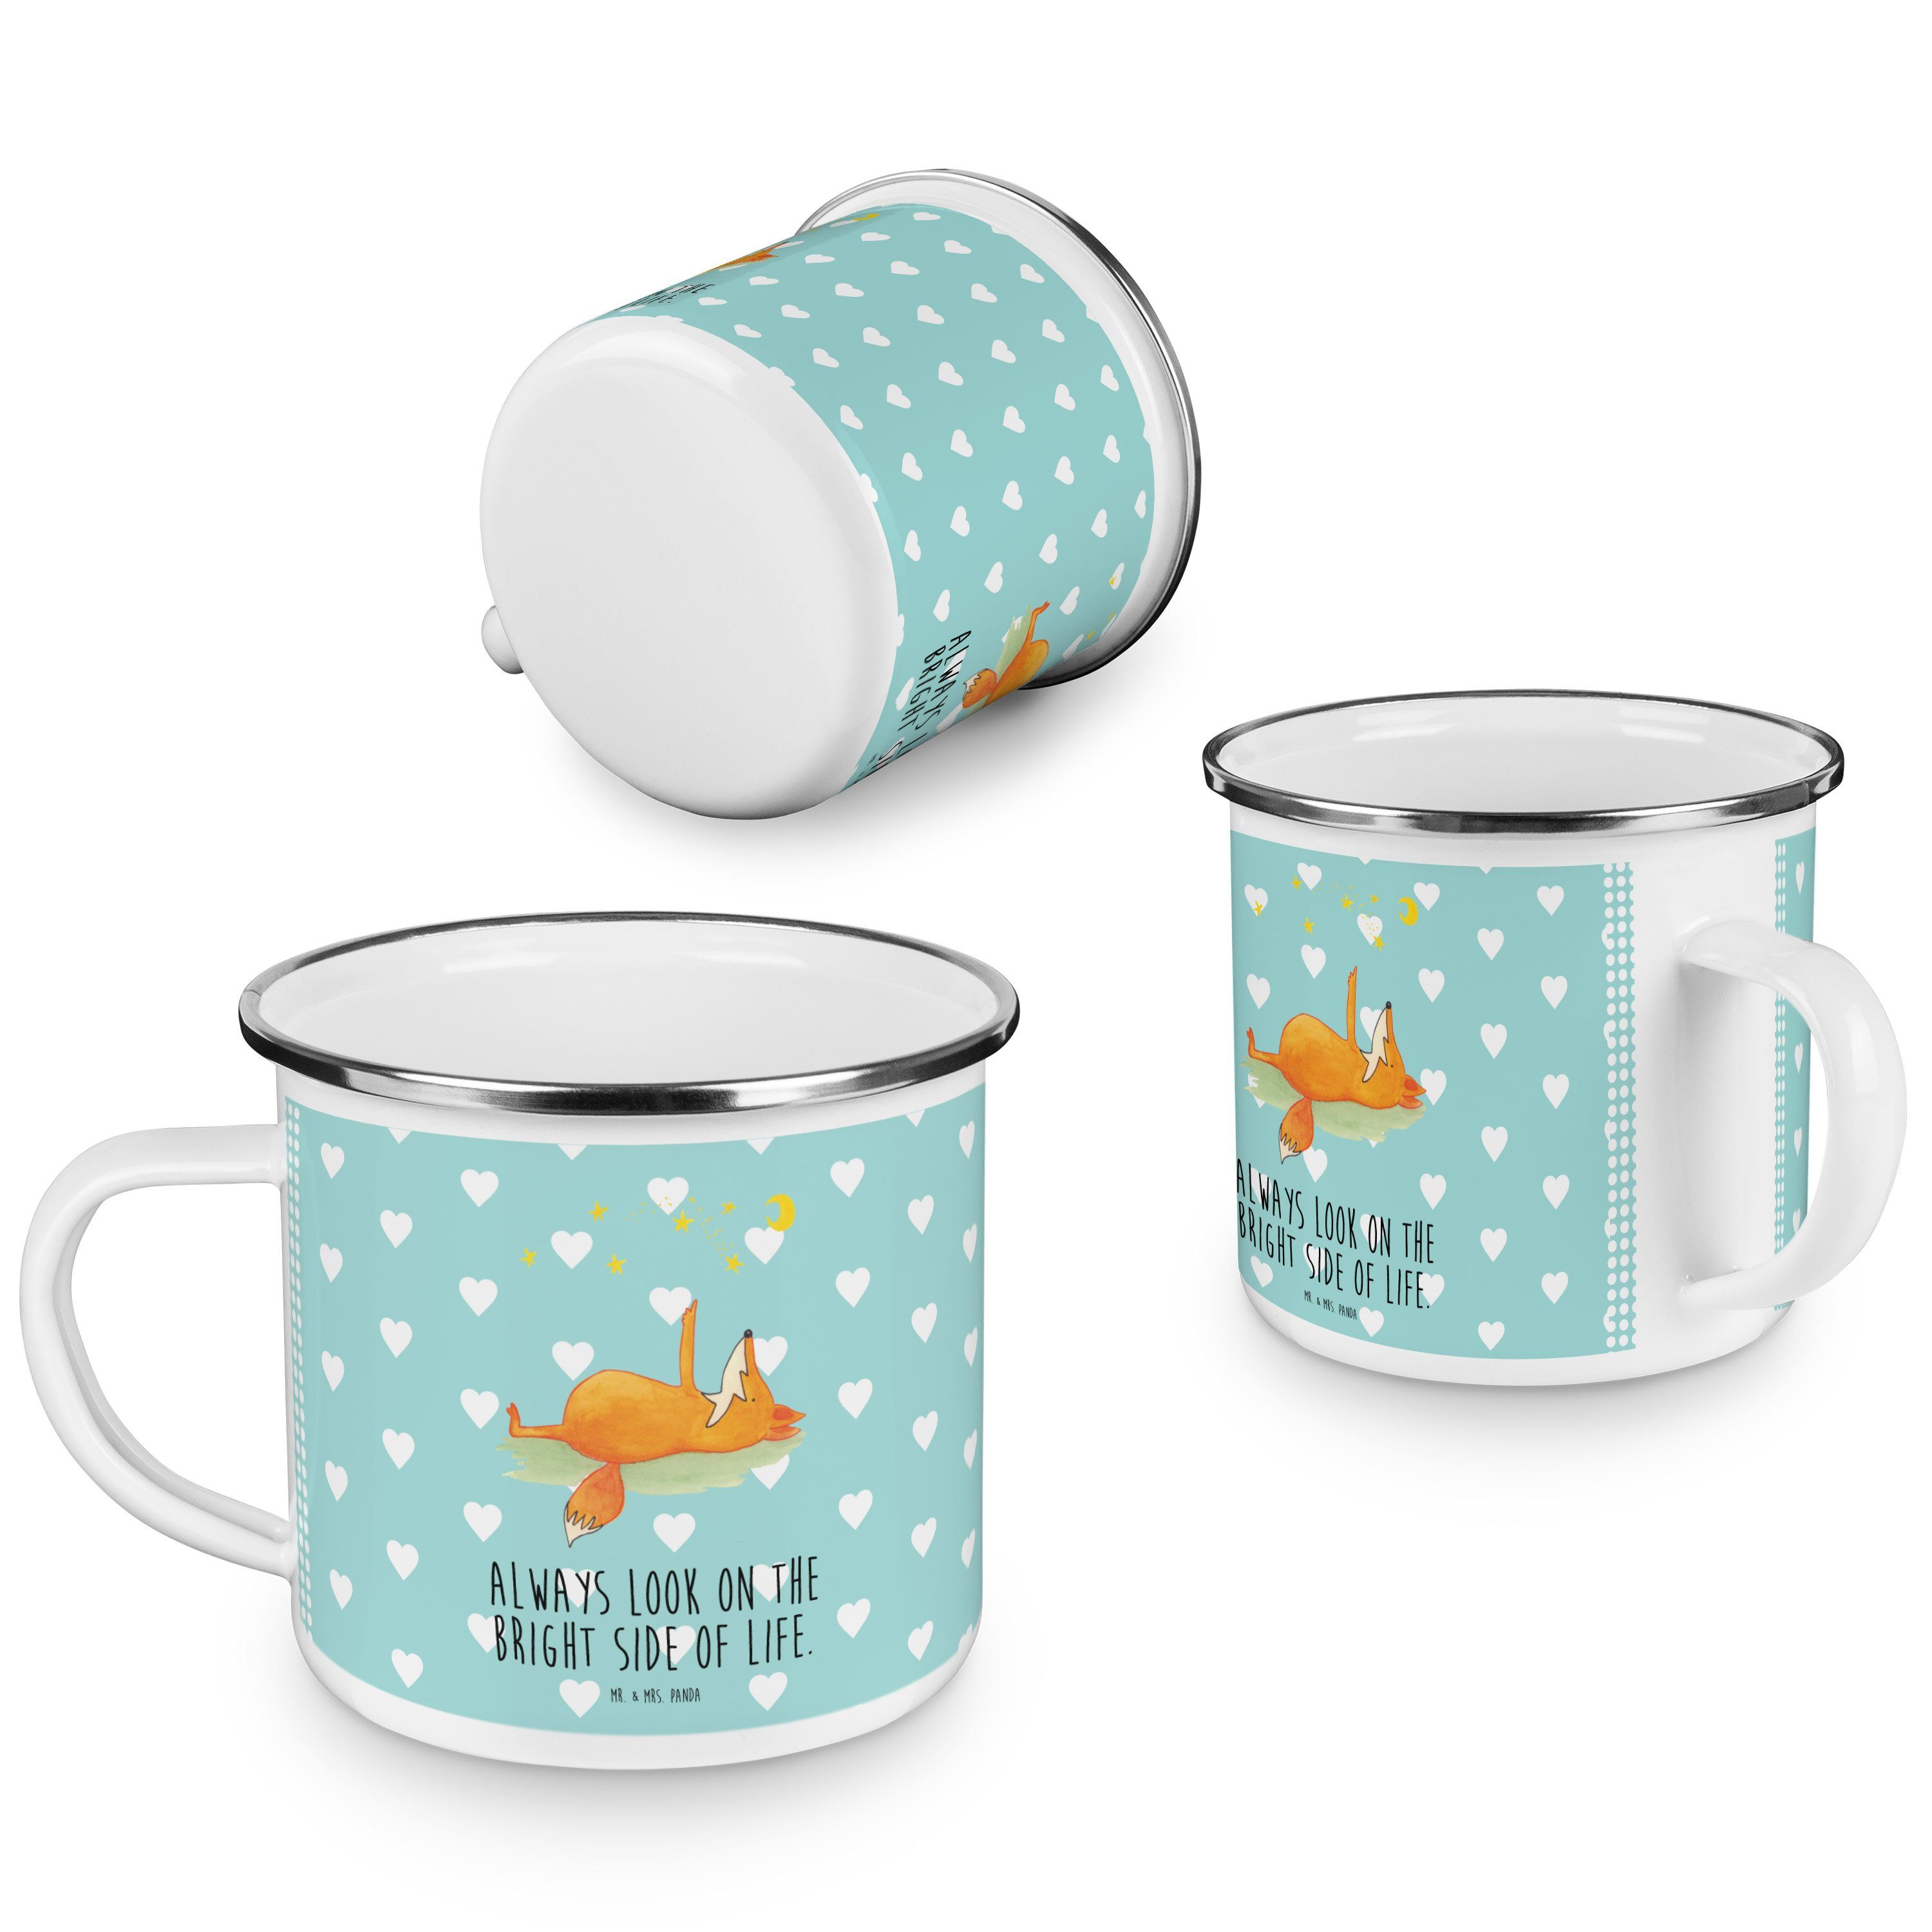 Mr. & Mrs. Panda Becher - - Sterne Emaille Geschenk, Türkis Campingbecher, Fuchs Emaille Roma, Pastell